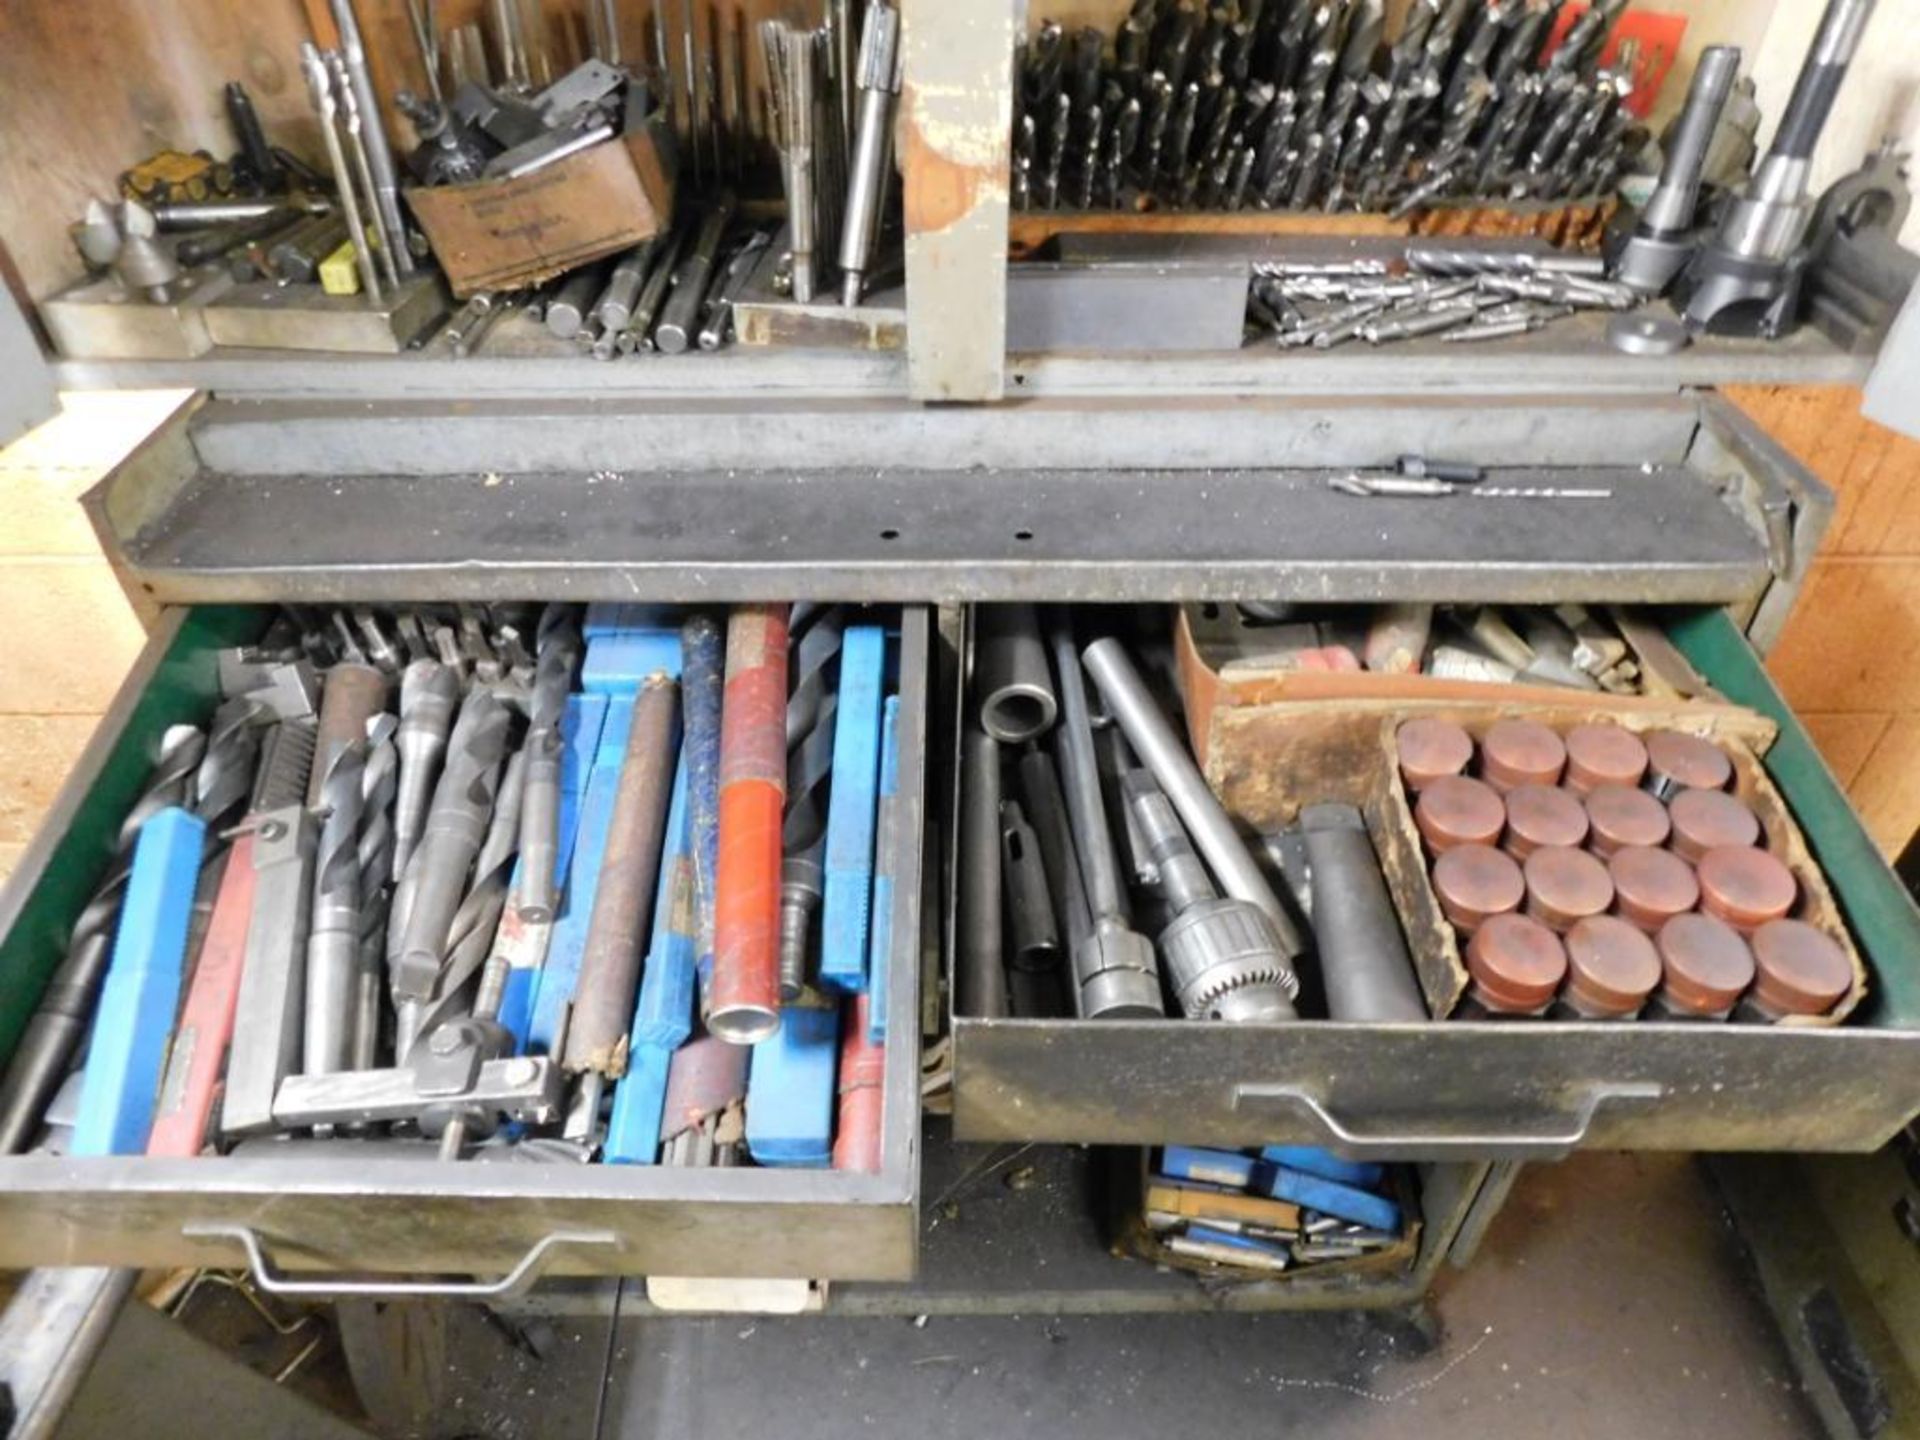 LOT: Assorted Drill Bits, Reamers, Drill Chucks, Cutters, Collets, etc. in Cart & Cabinet - Image 2 of 2